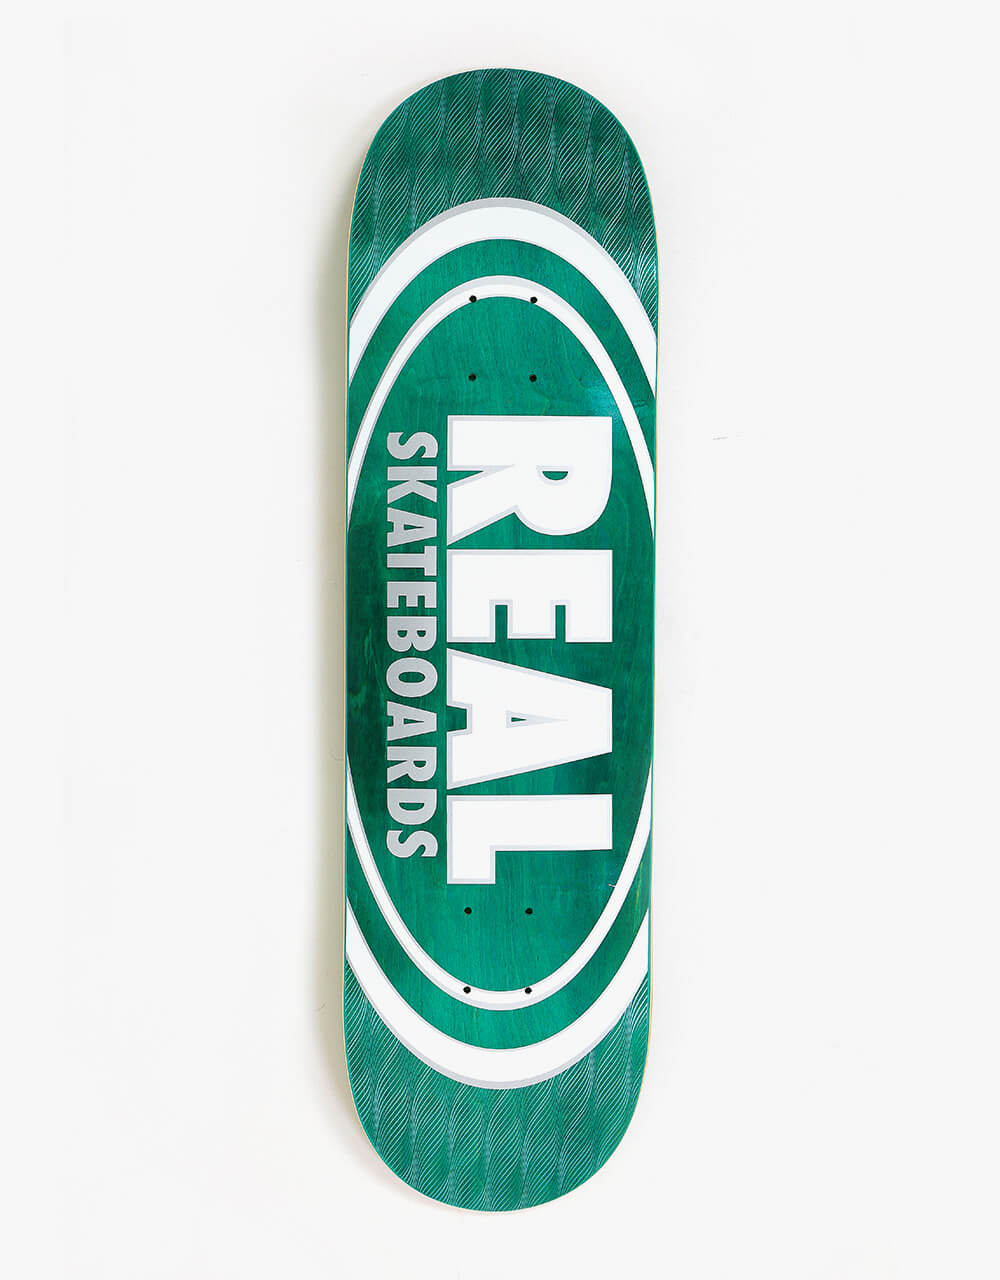 Real Oval Pearl Patterns Skateboard Deck - 8.5"